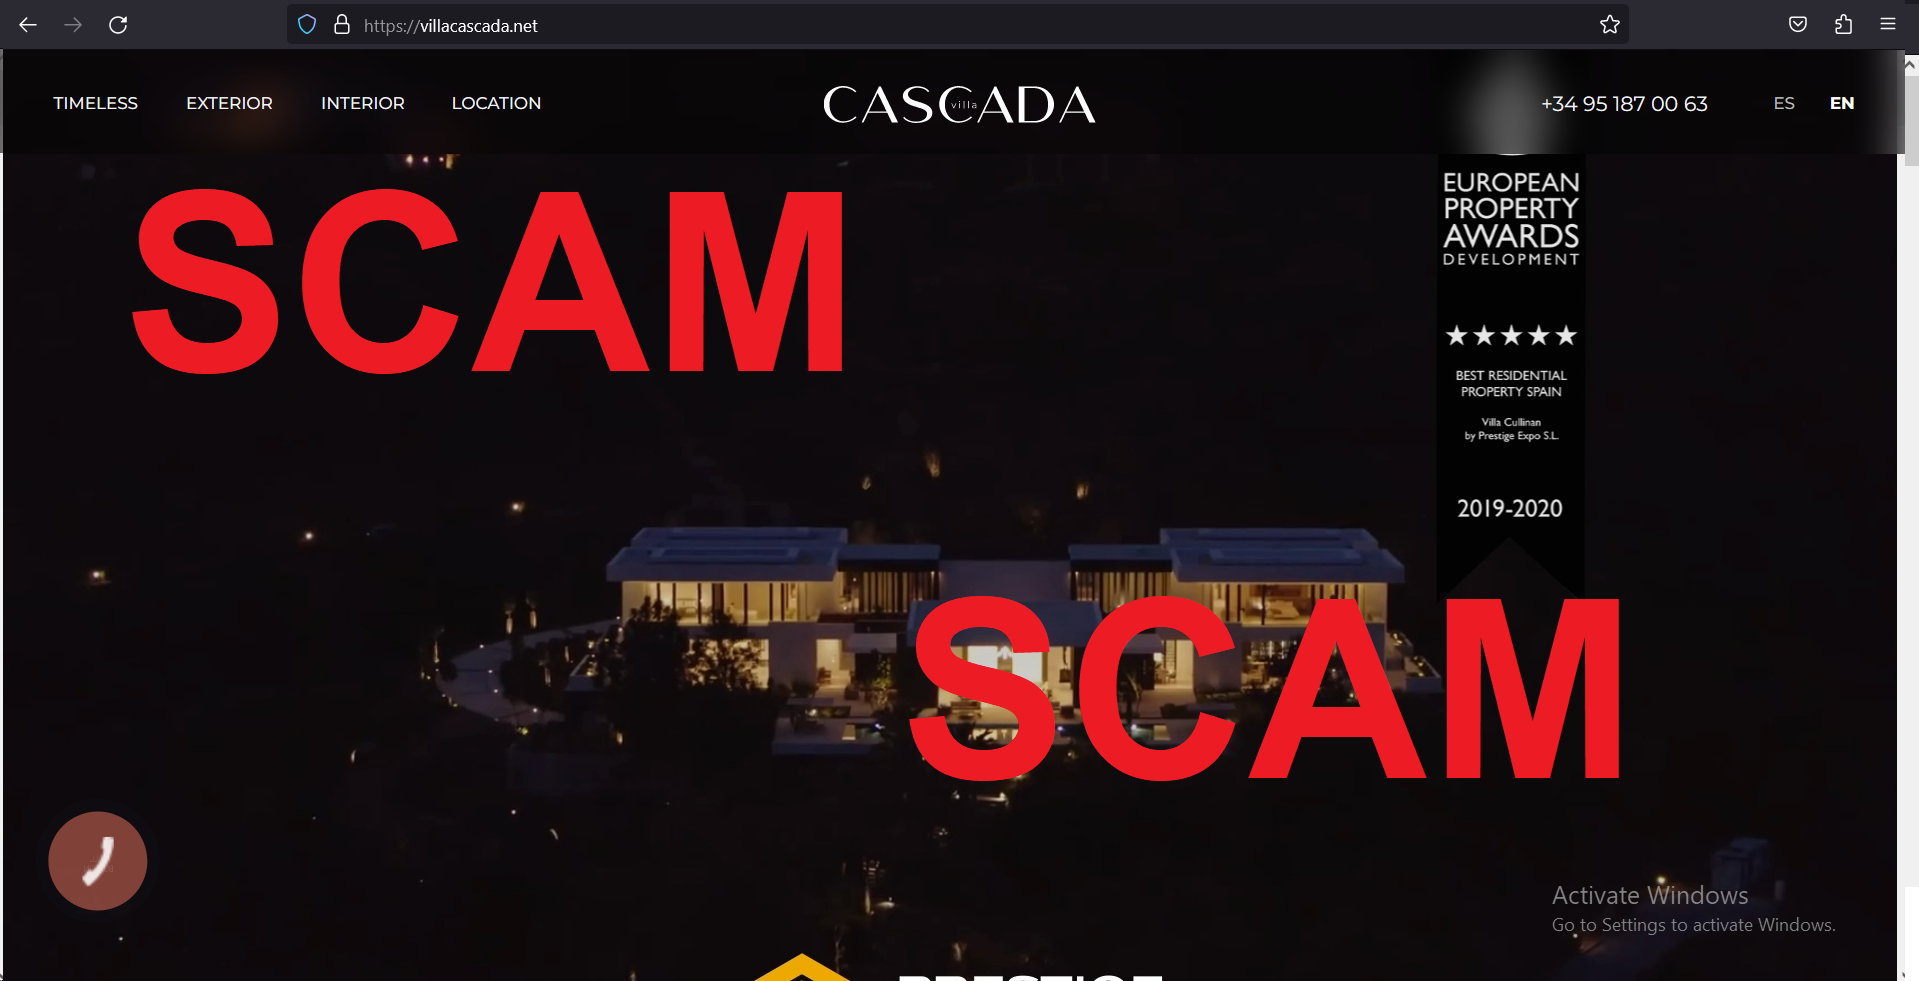 You are currently viewing Fraudulent website: villacascada.net SCAM SCAM SCAM